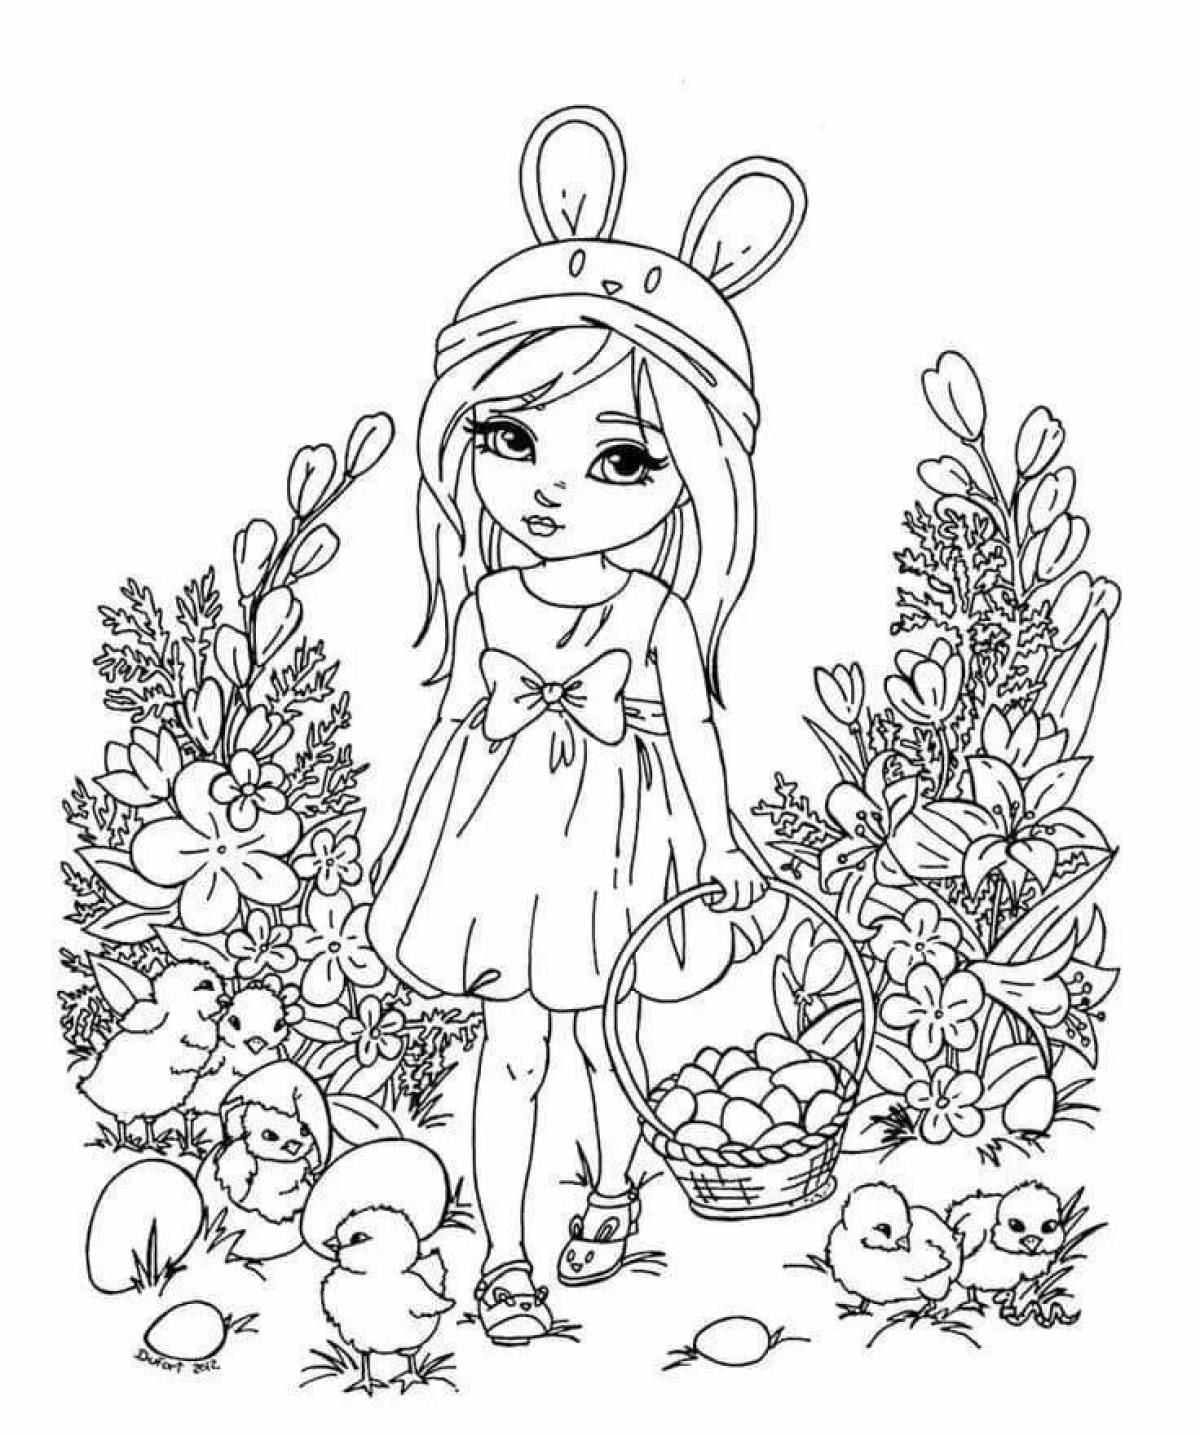 Amazing coloring page 12 for girls